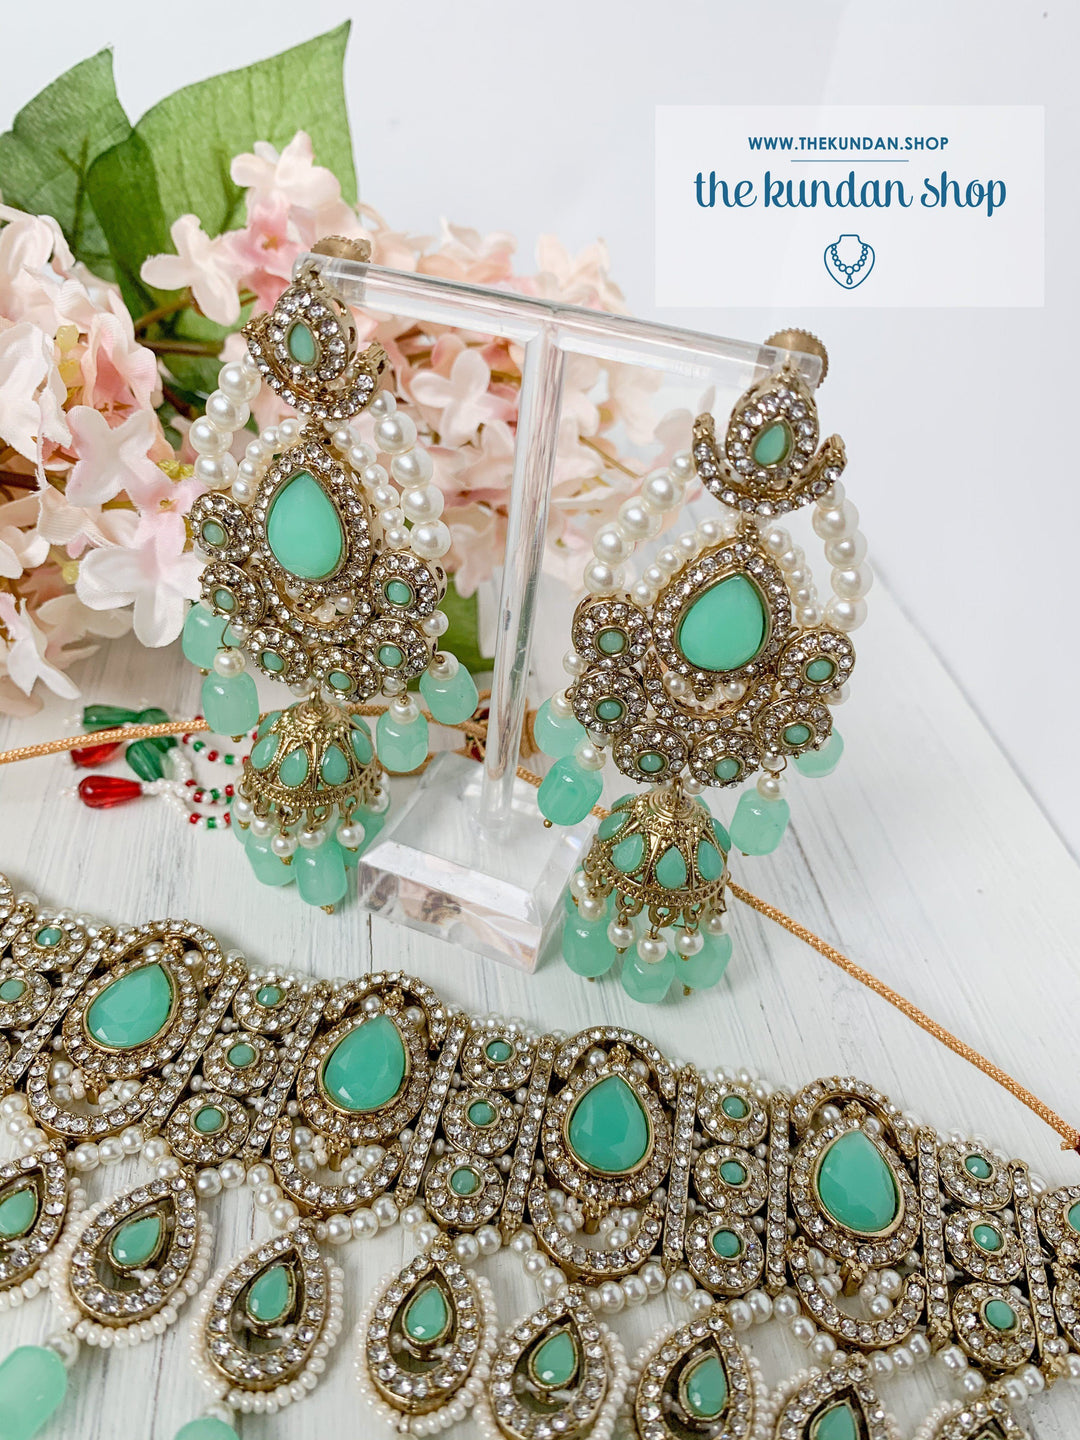 Magnificent Teardrops in Mint & Gold Necklace Sets THE KUNDAN SHOP 